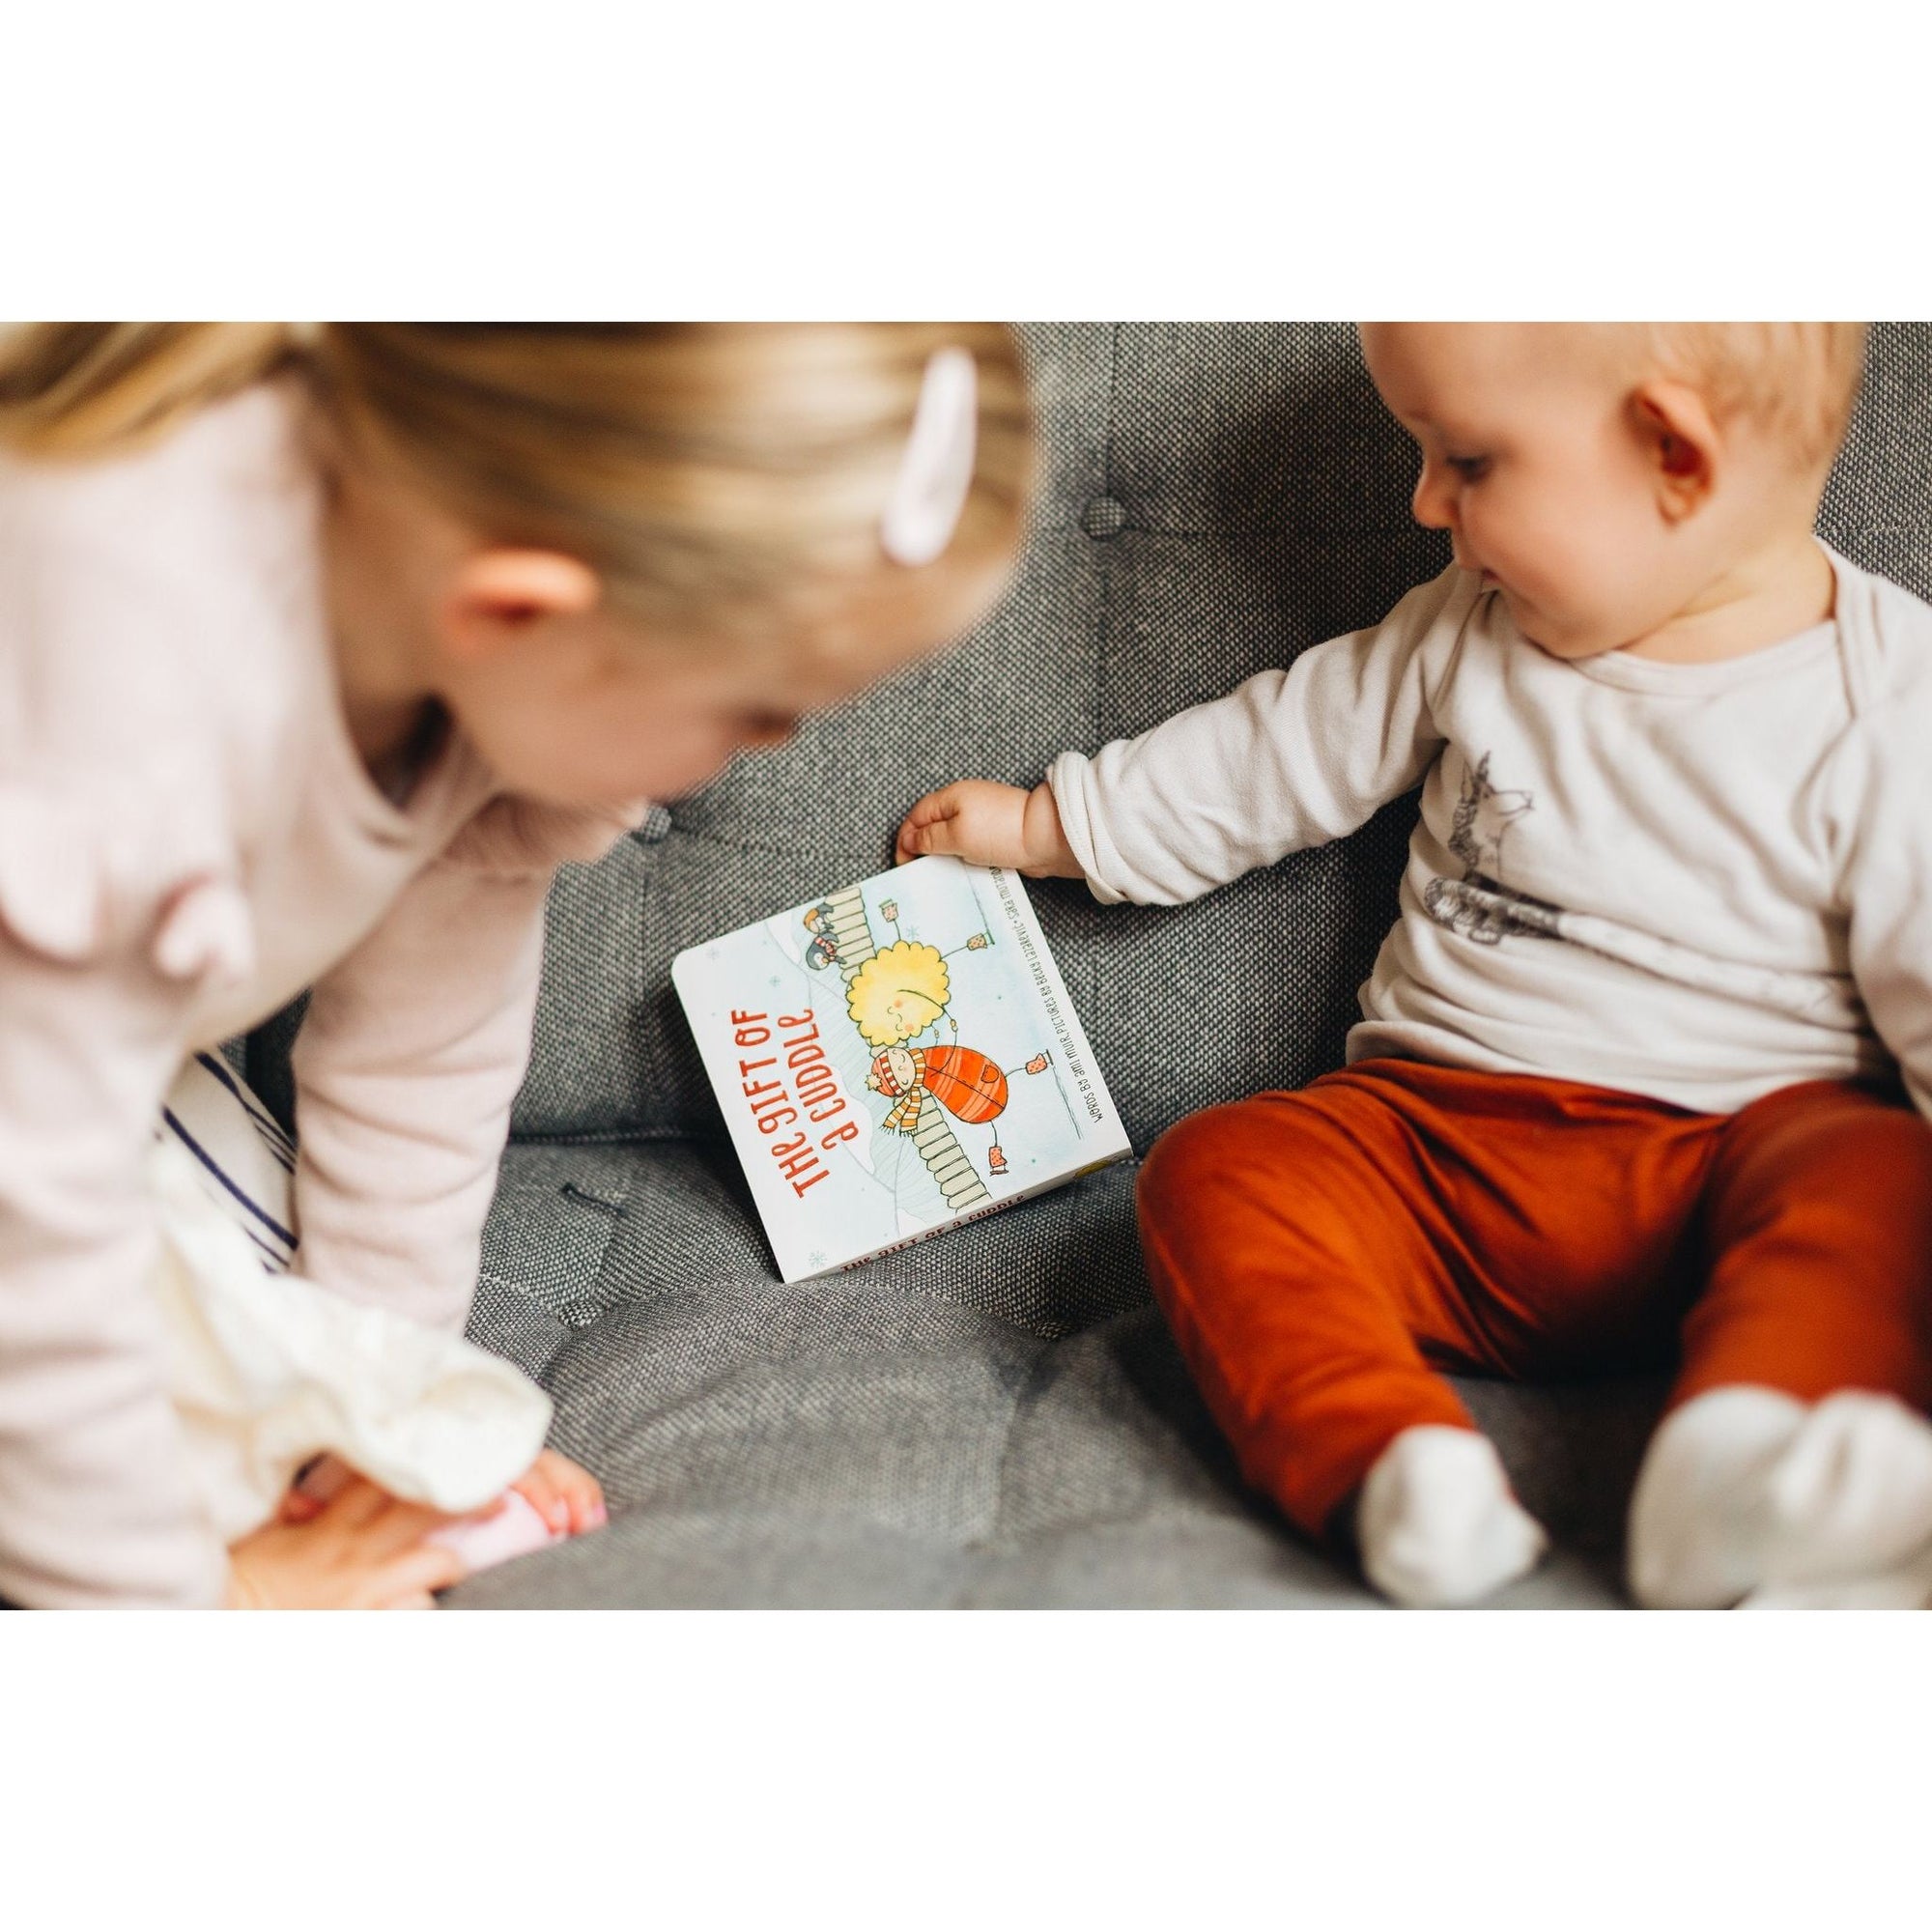 The Kiss Co - The Gift Of A Cuddle Board Book - Urban Naturals